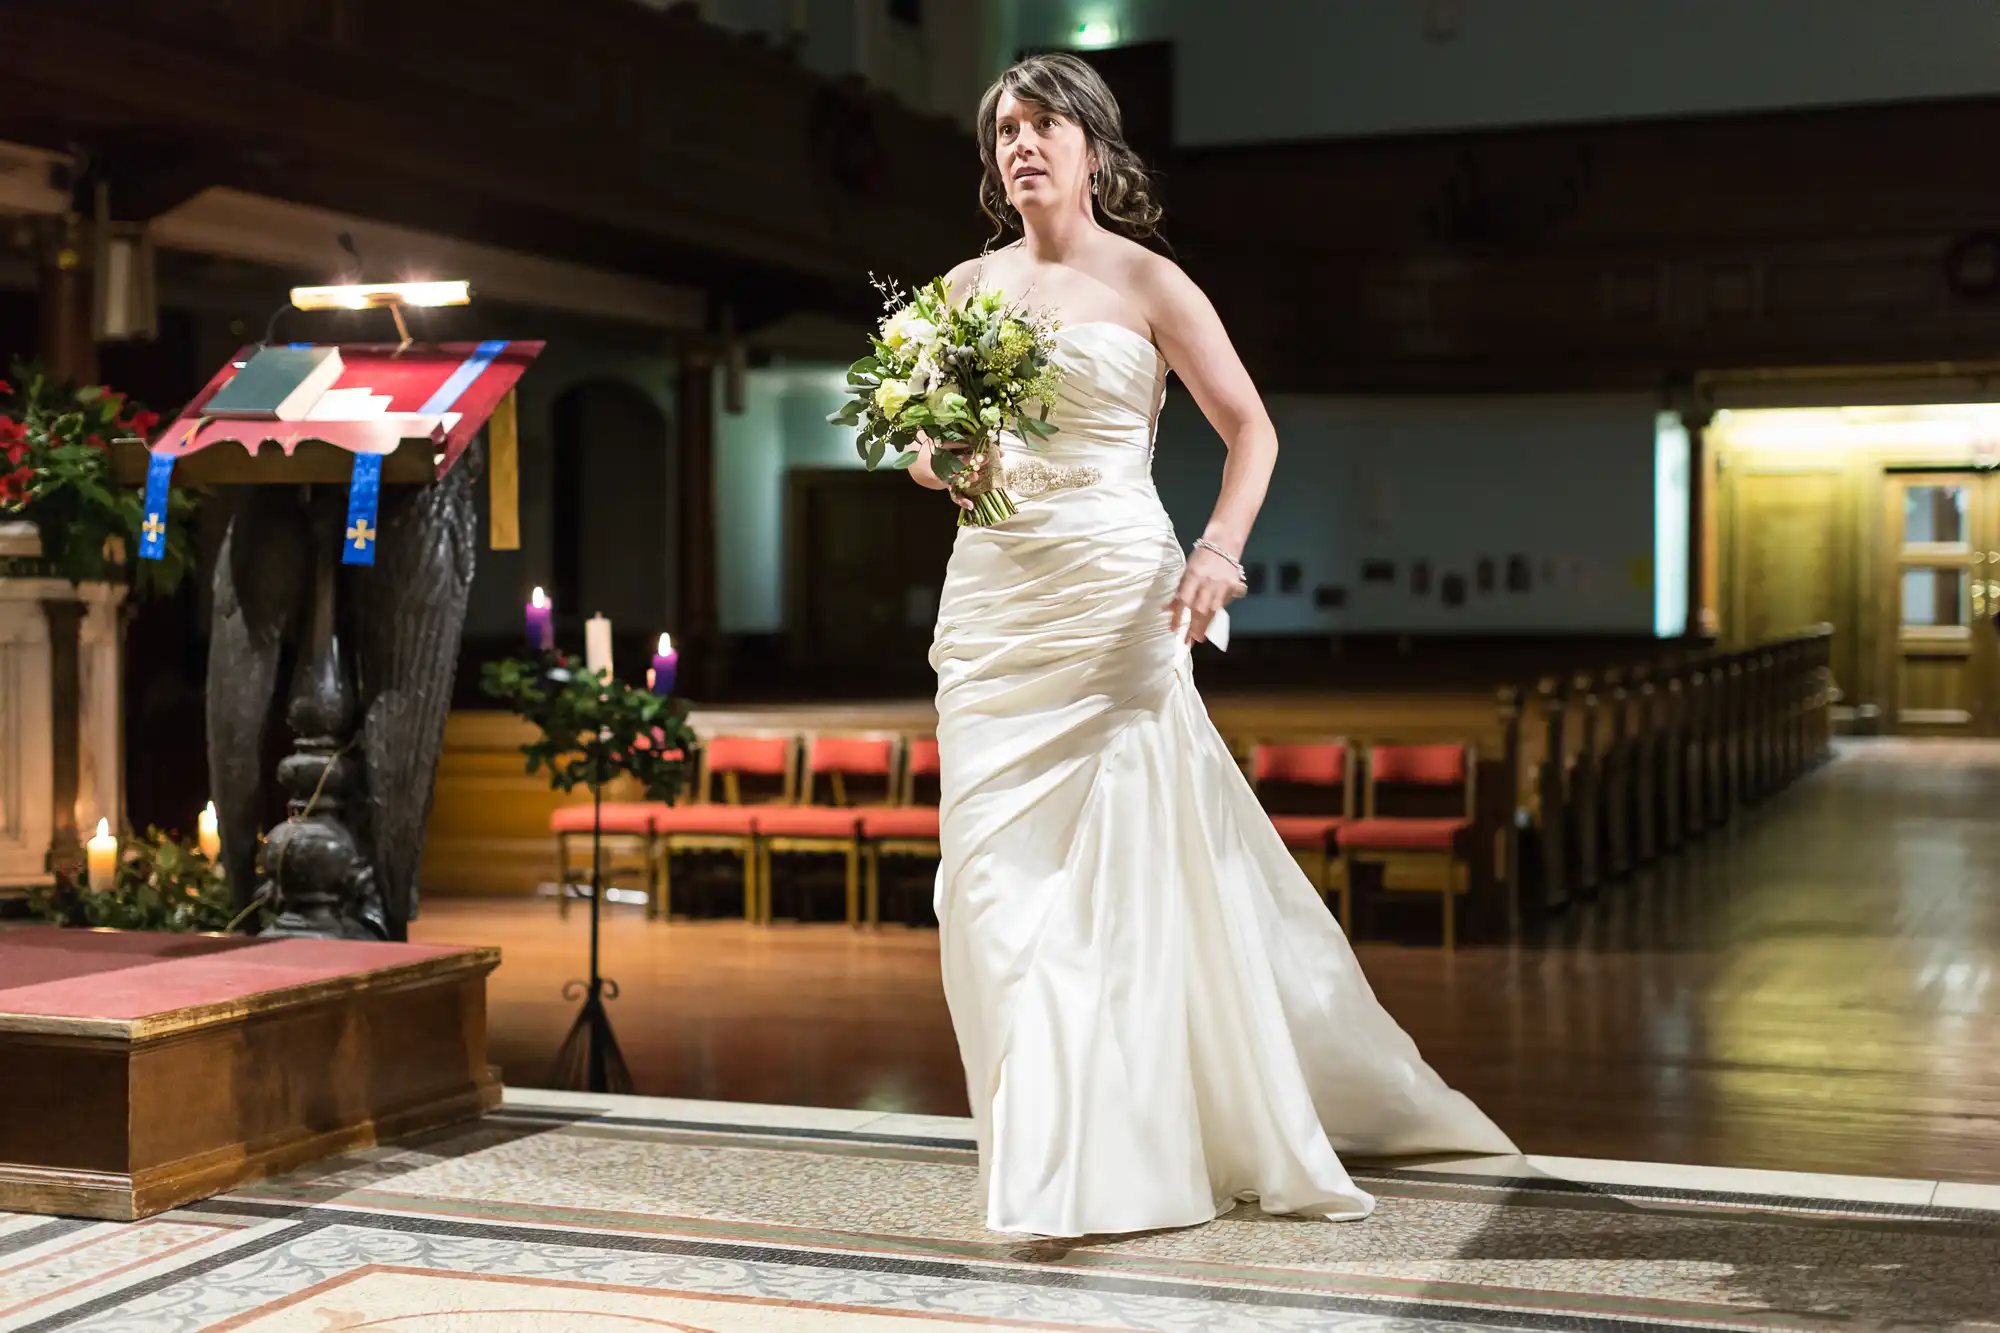 A bride in a strapless white gown holds a bouquet, looking anxious in a church aisle, with a casket draped in a national flag nearby.